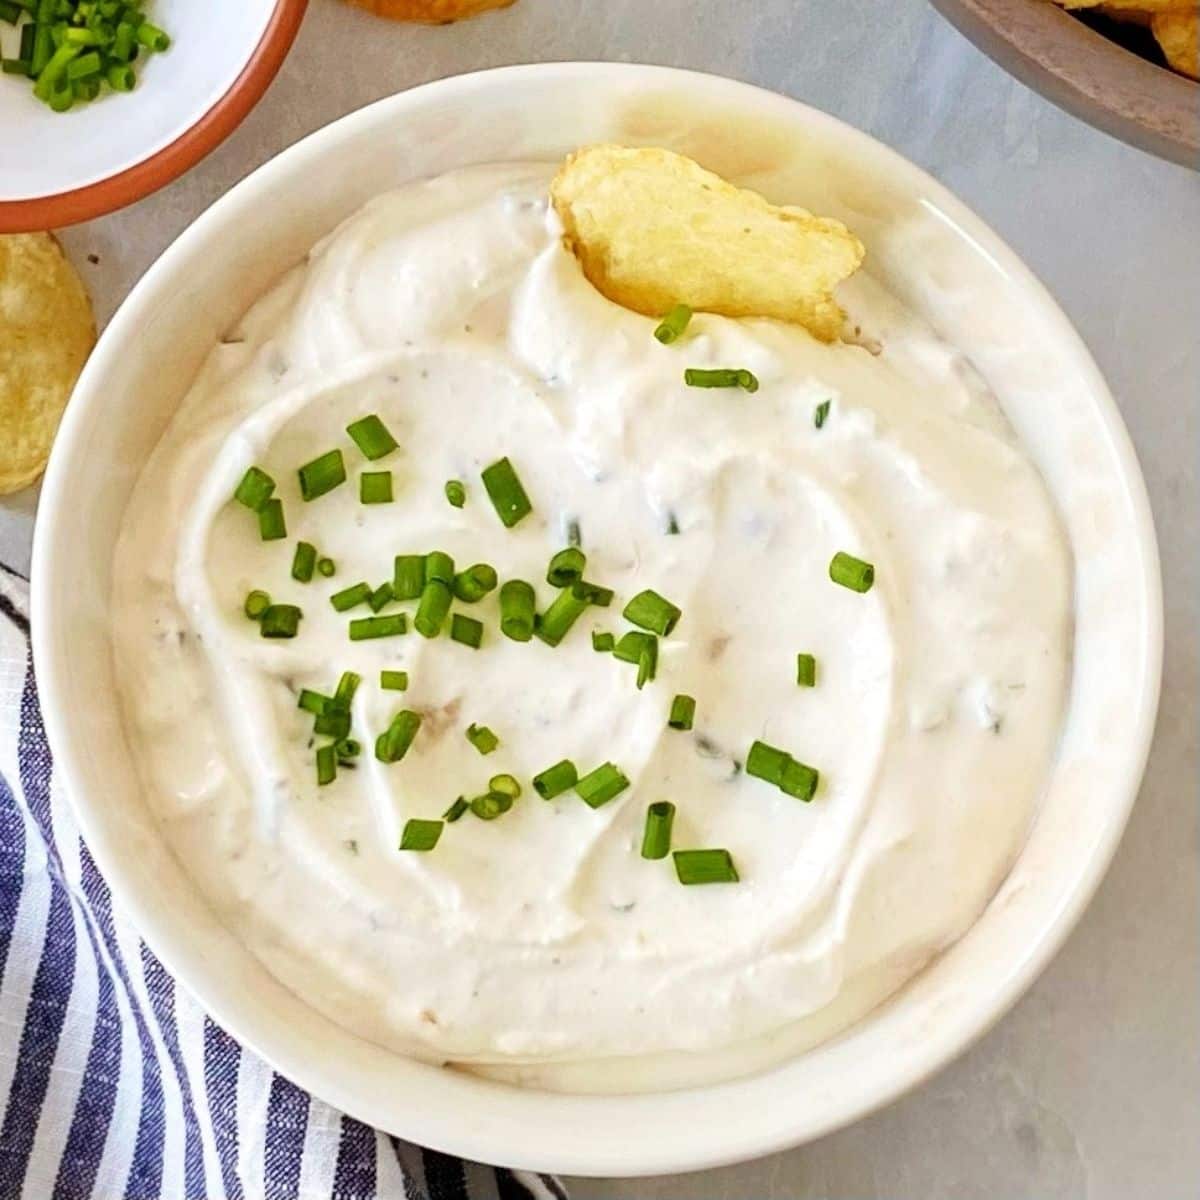 roasted garlic dip garnished with chives.